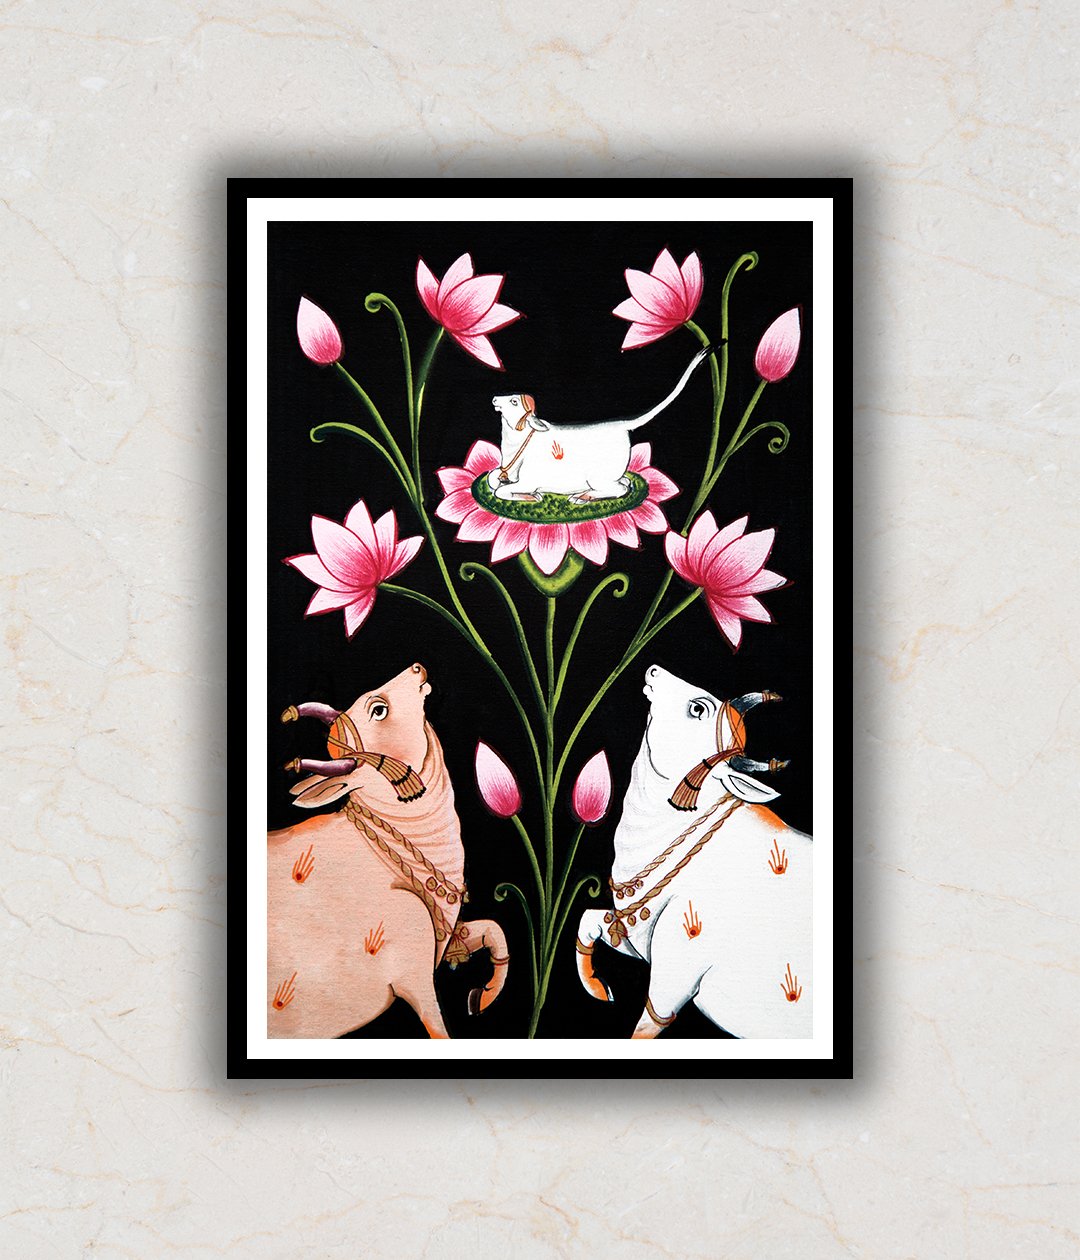 Cow and Lotus Pichwai Art Painting For Home Wall Art Decor 1